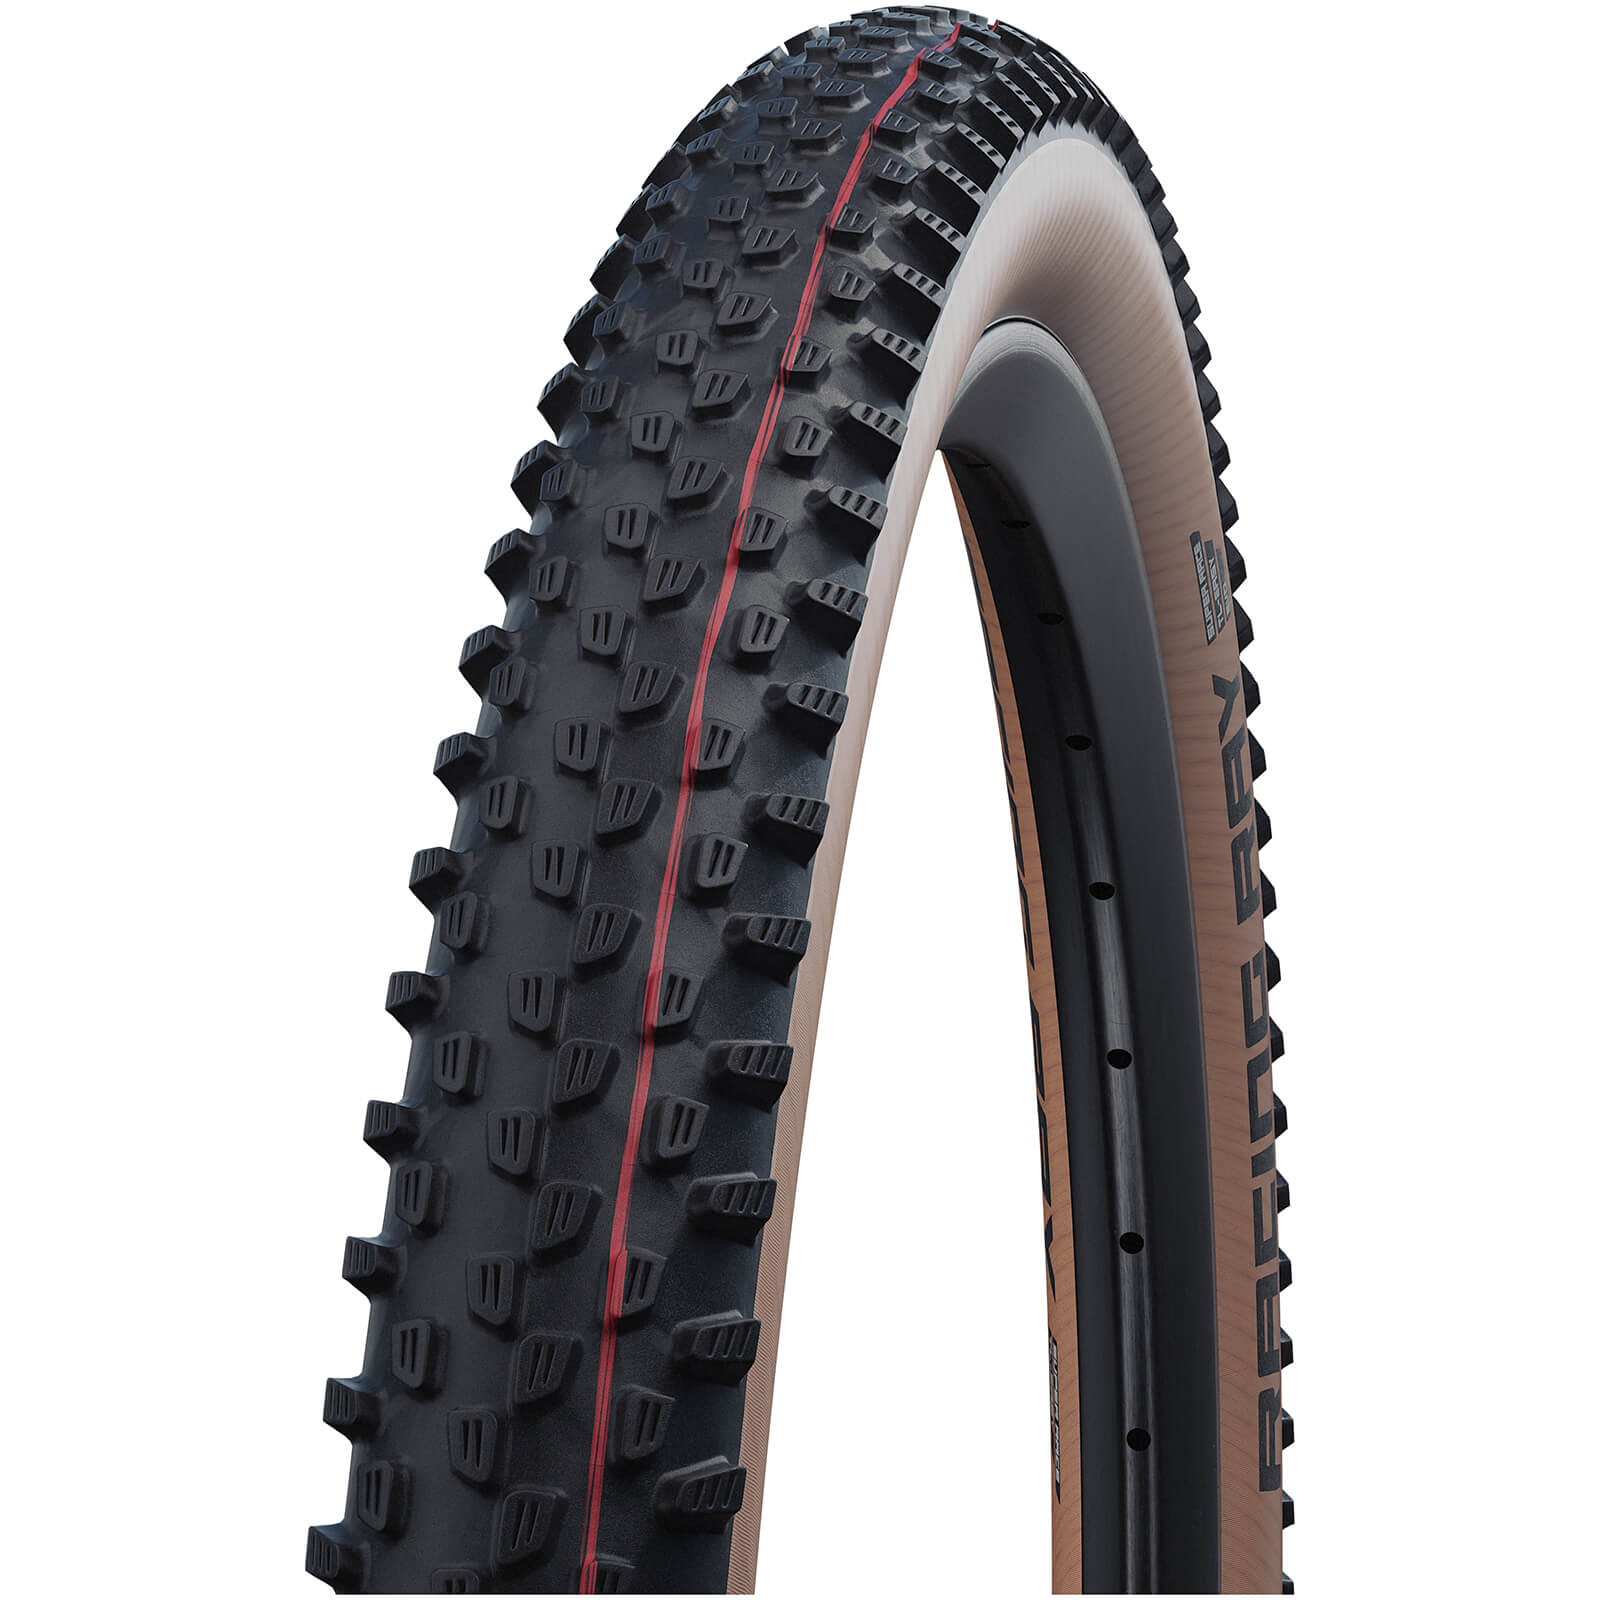 Schwalbe Racing Ray Evo Super Race Tubeless MTB Tyre - Transparent Skin - 29in x 2.35in